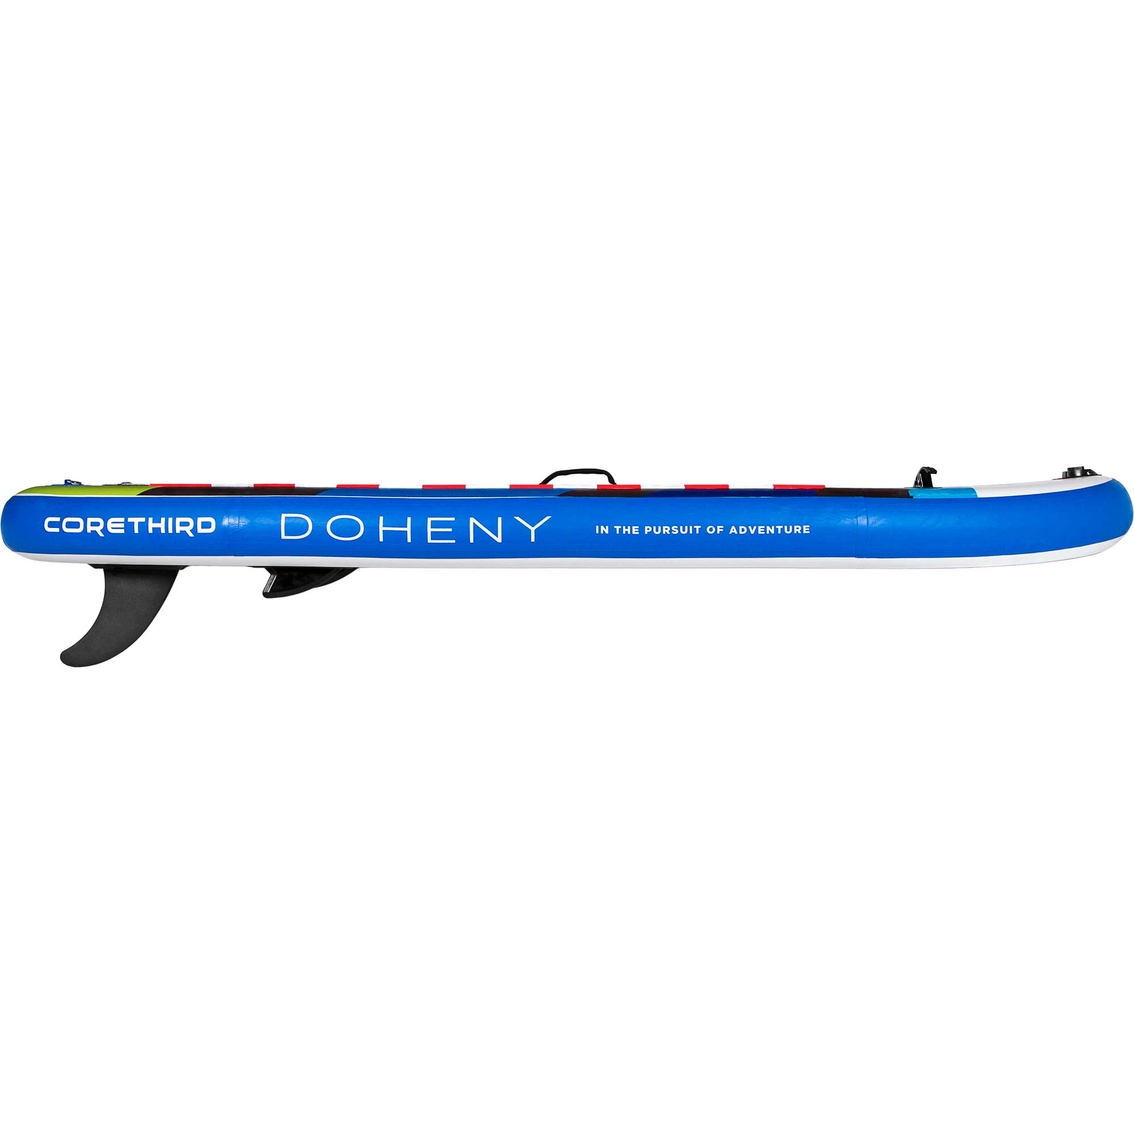 Core Third Doheny Inflatable Paddle Board - Image 5 of 8